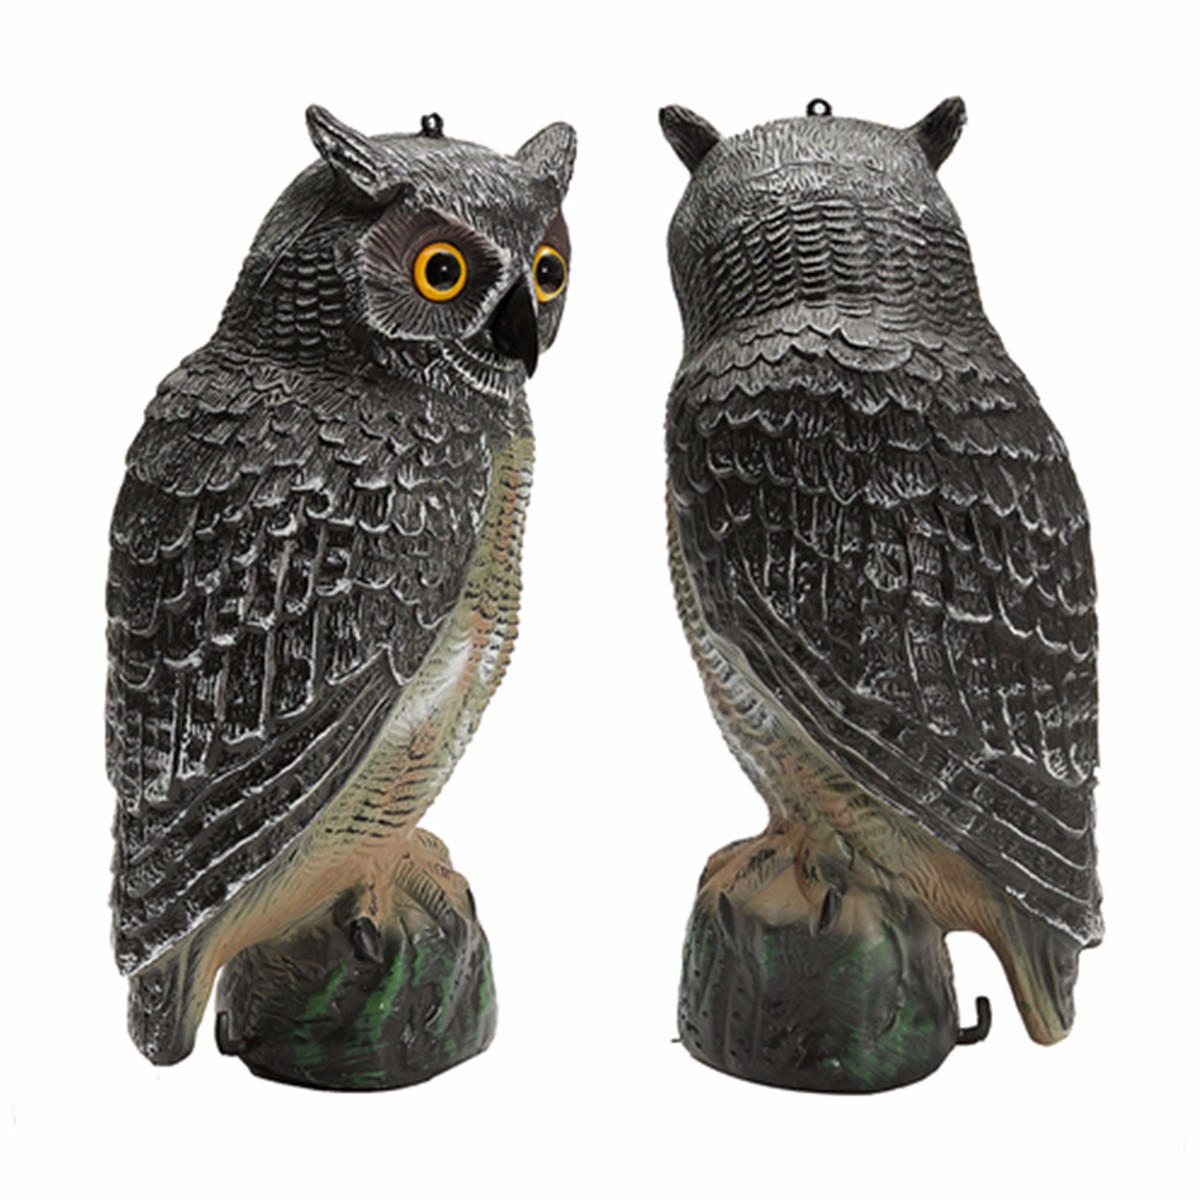 Outdoor Hunting Large Realistic Owl Decoy Straight Head Pest Control Crow Garden Yards Scarer Scarecrow Pest Decorations